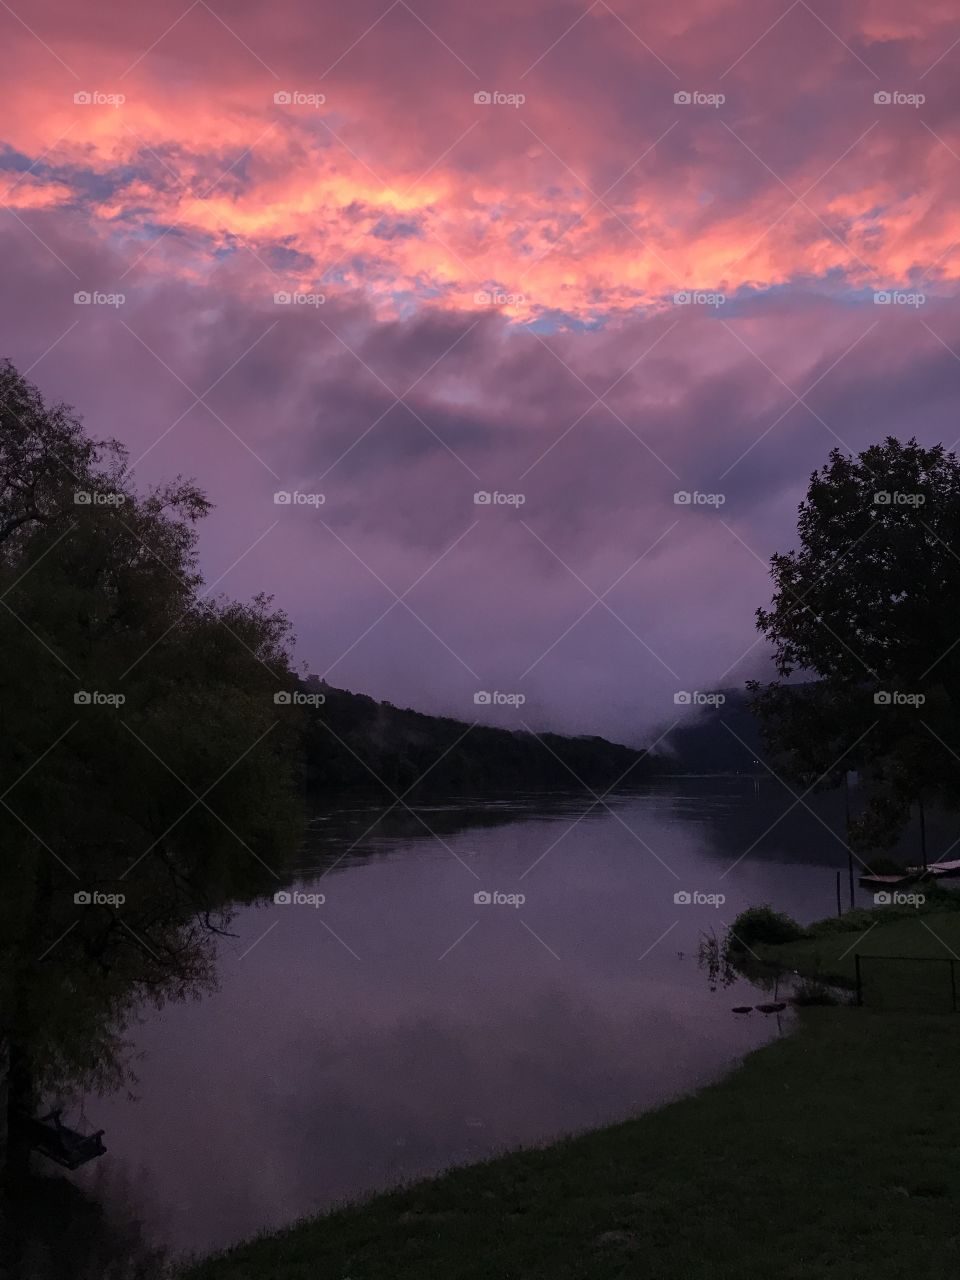 Sunset glowing clouds over river 